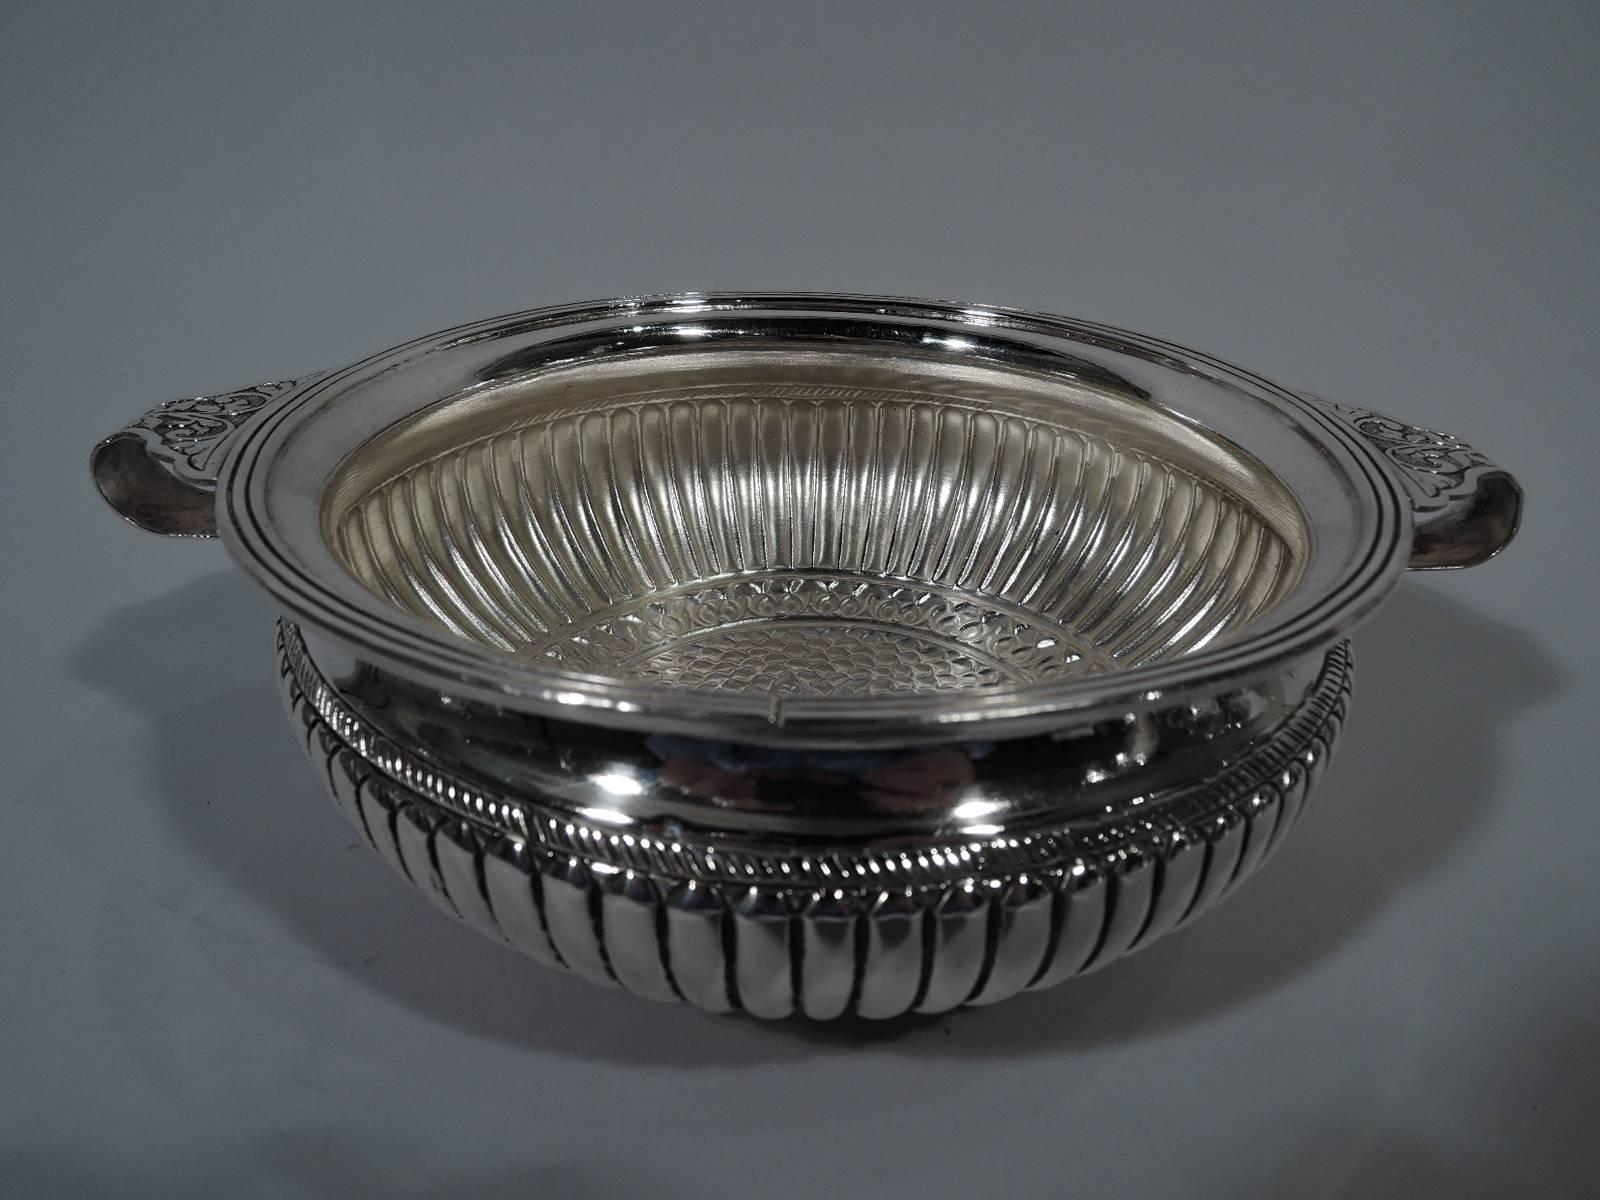 Antique European 800 silver bowl. Bellied with reeded rim and three round supports. Side handles have scalloped mounts with leaves and scrolls on stippled ground. On exterior the sides are gadrooned and the bottom has central flower surrounded by